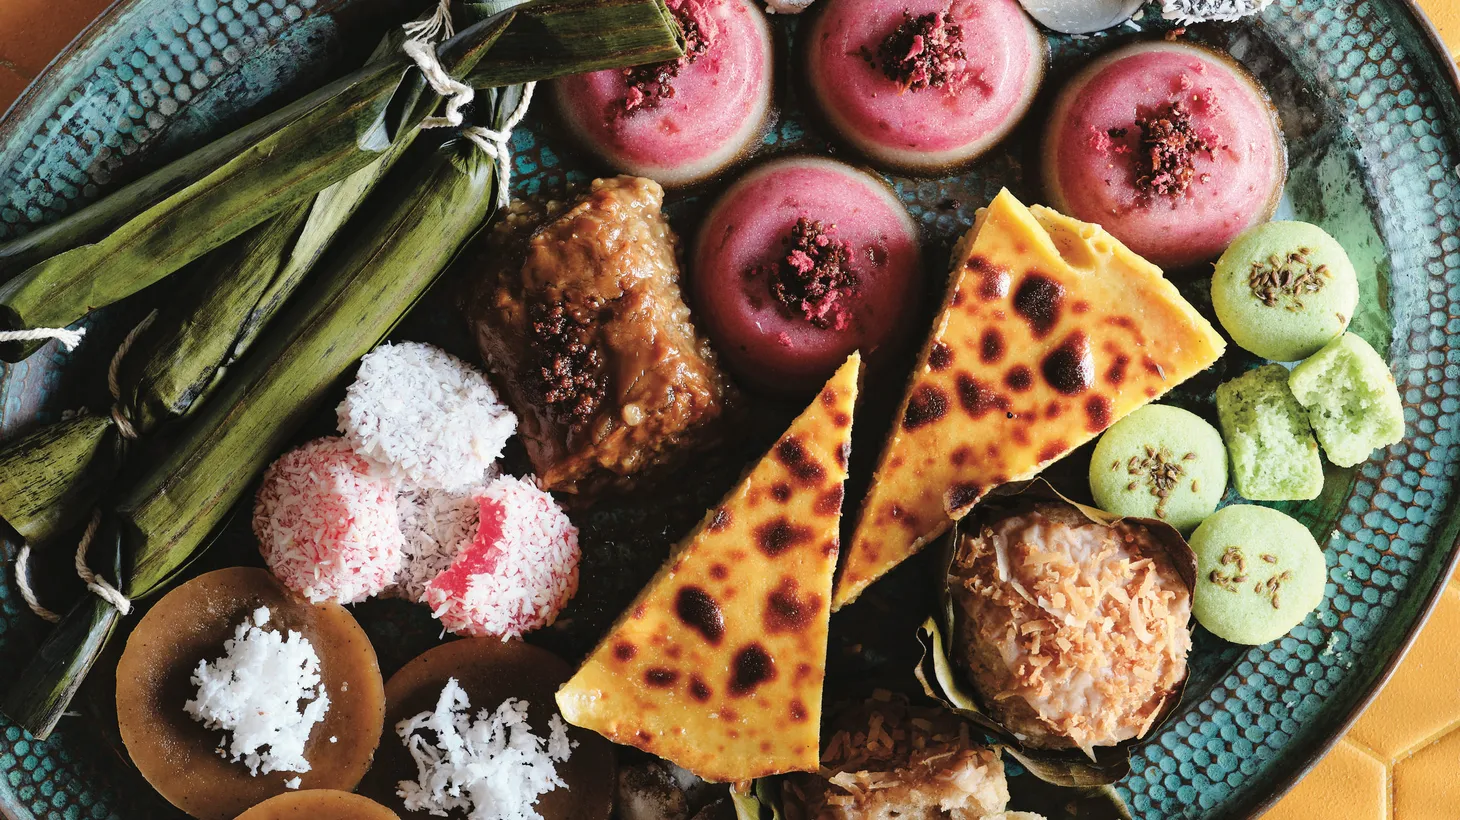 This dessert platter shows off the bright colors in a variety of Filipino desserts. You'll find recipes for them in "Mayumu," a cookbook by Abi Balingit.